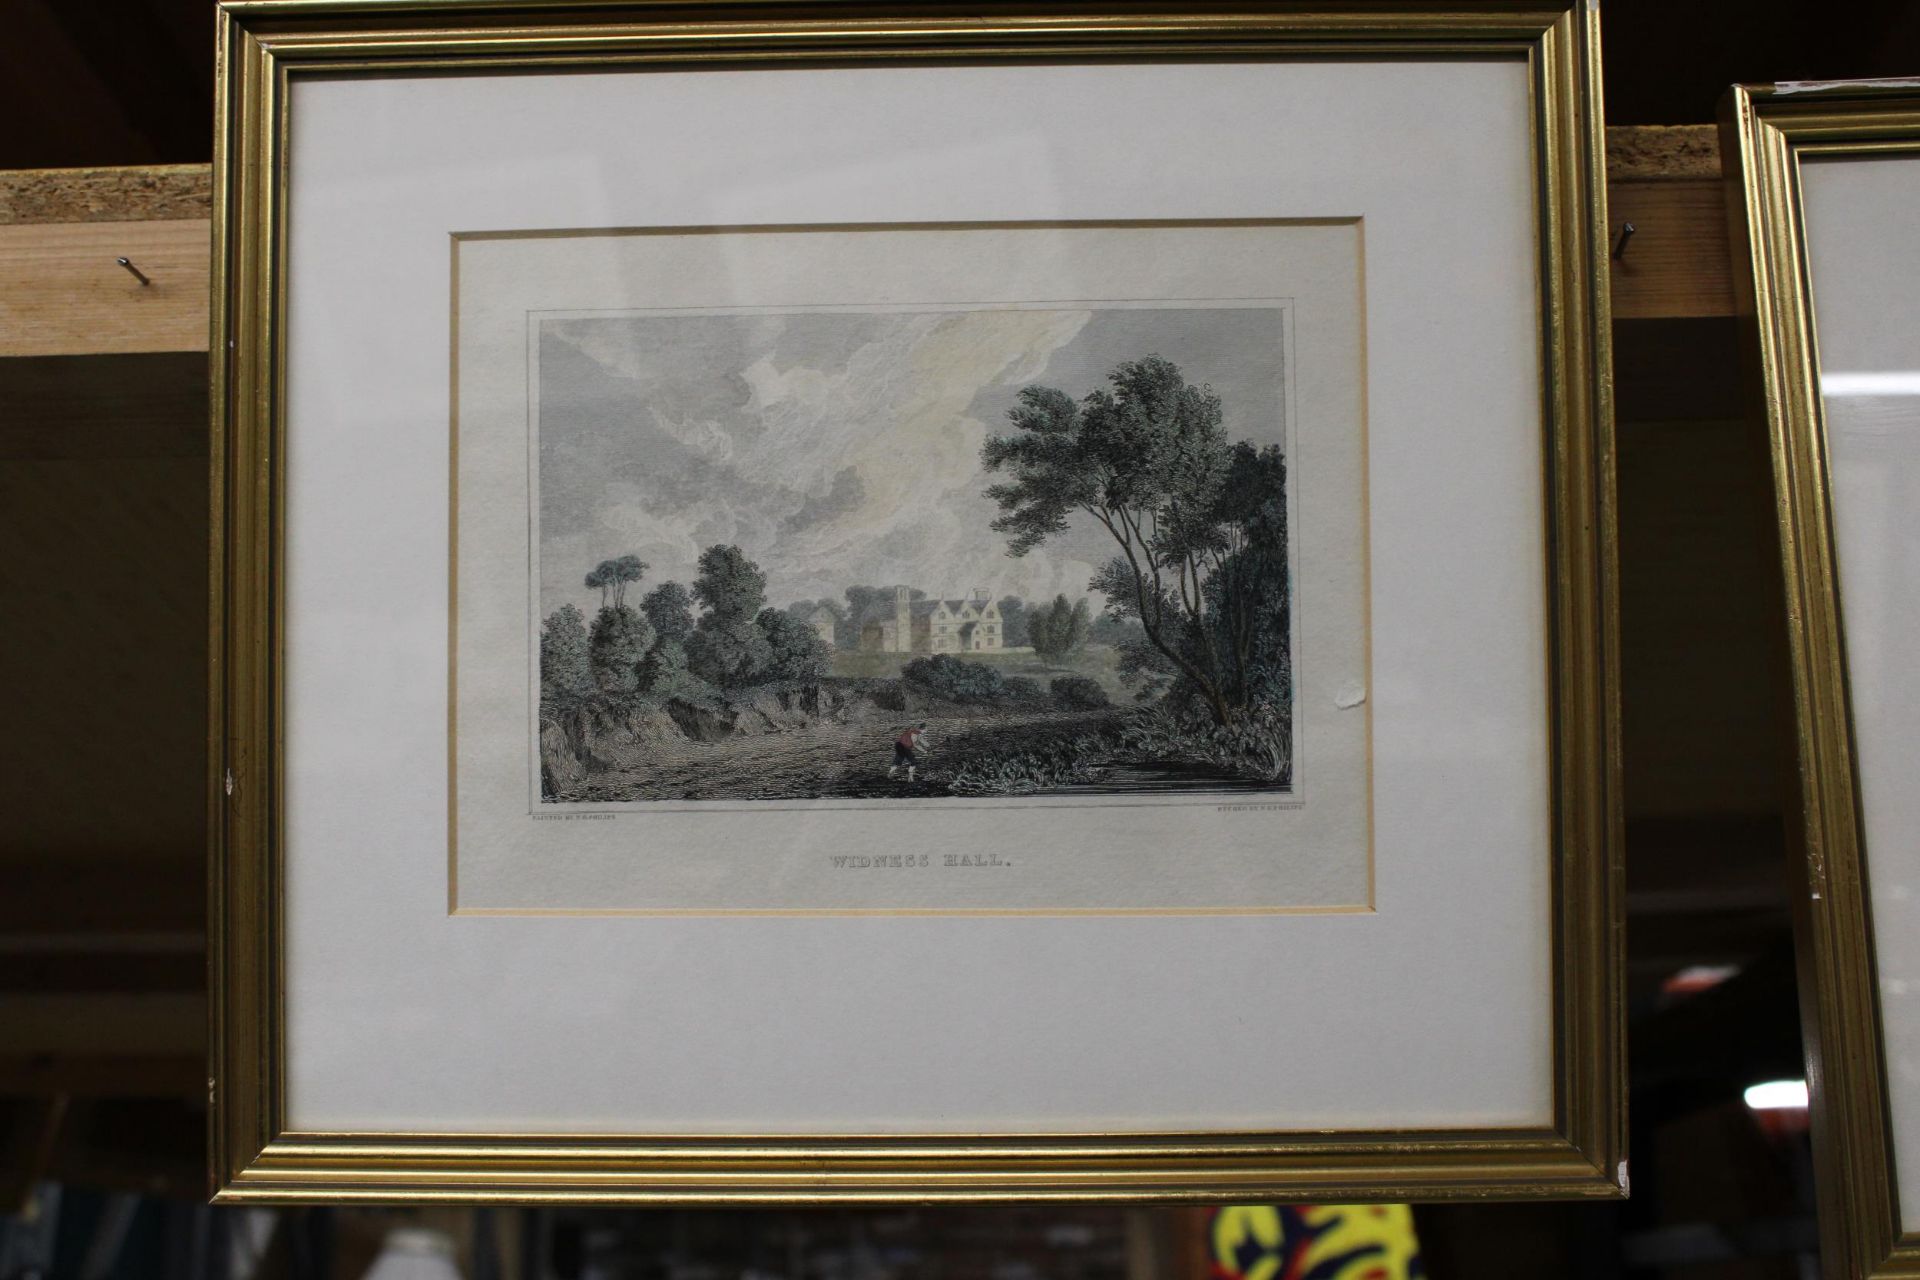 TWO VINTAGE COLOURED ENGRAVINGS, 'MOSLEYES HALL' AND 'WIDNESS HALL', FRAMED - Image 2 of 5